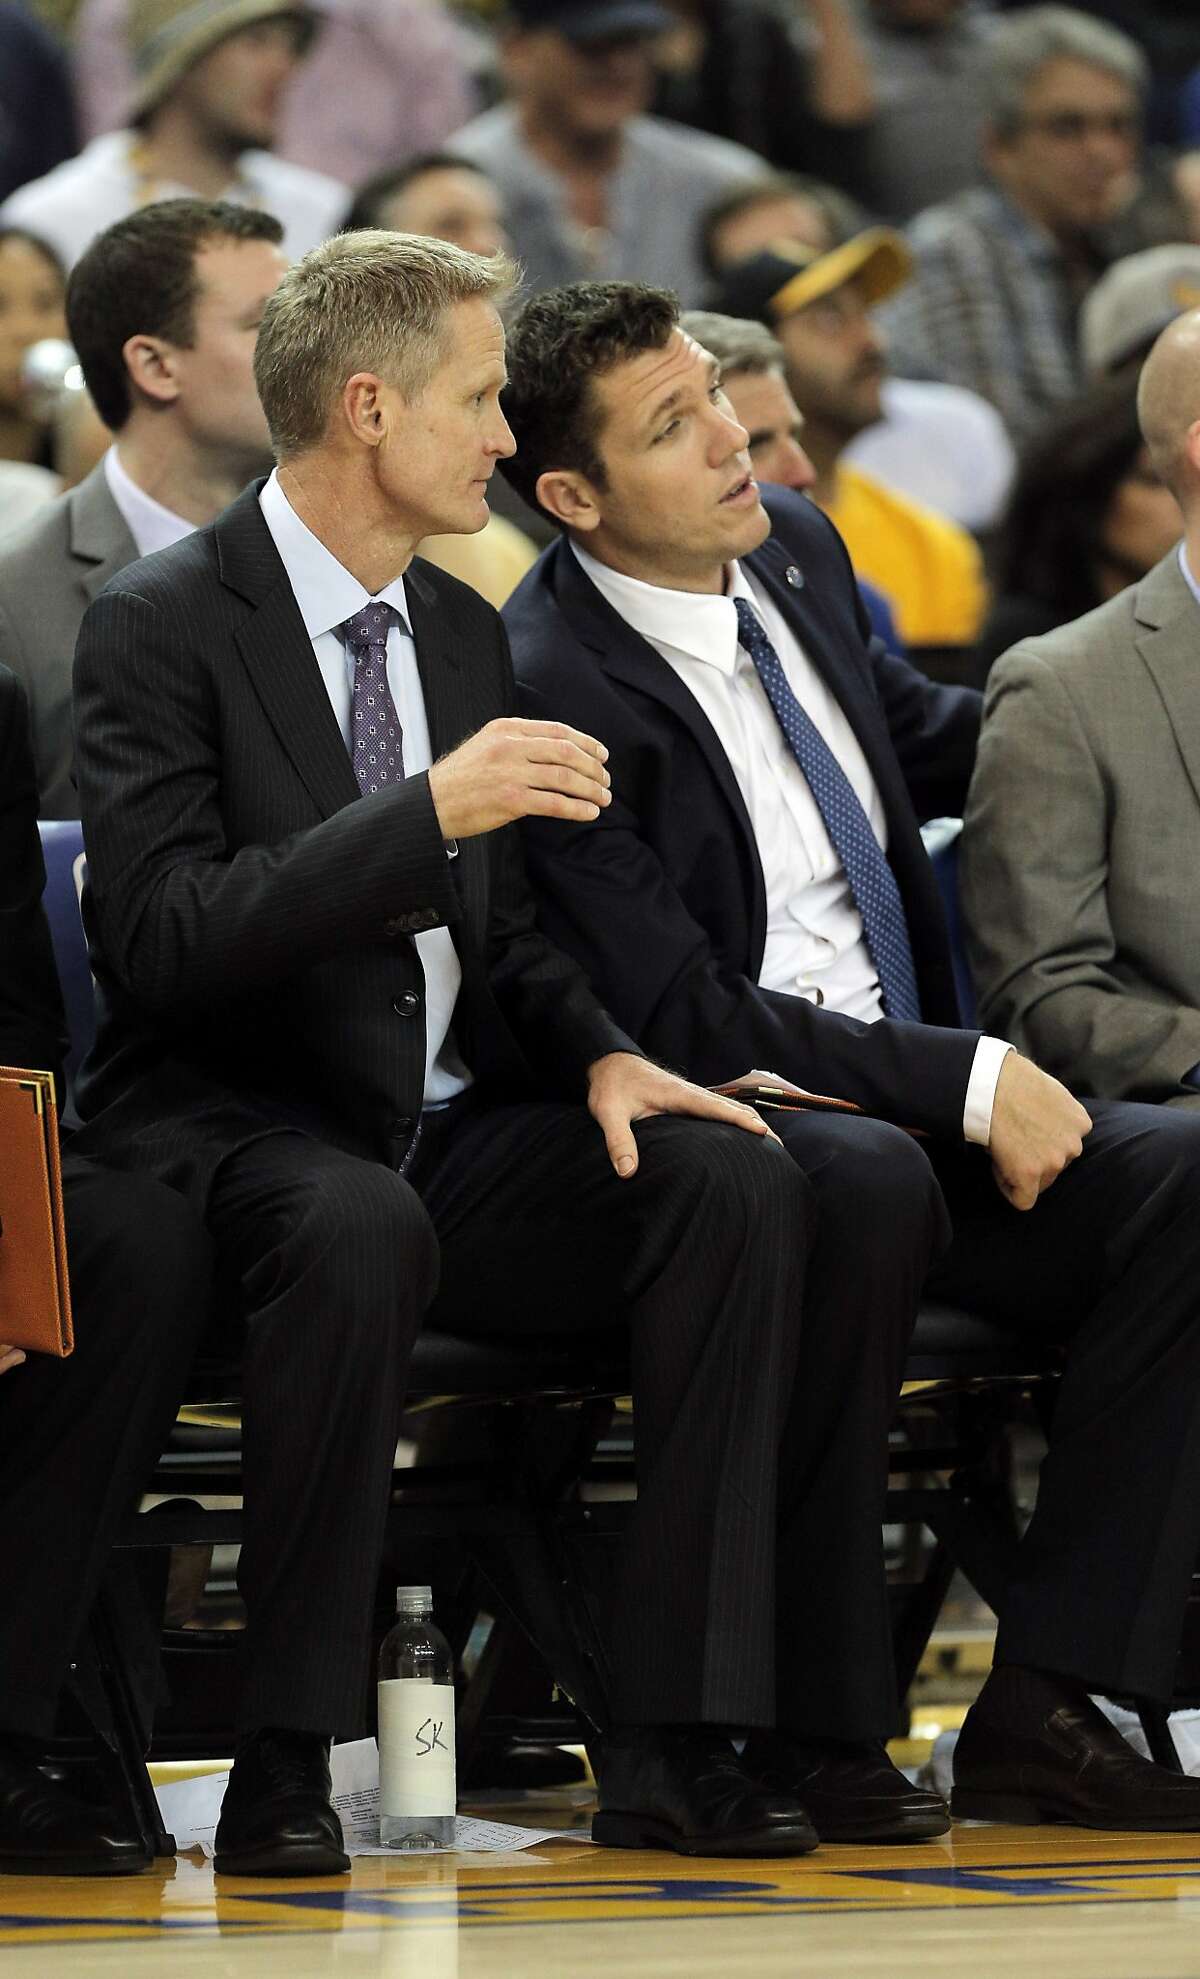 Head coach Steve Kerr, left, chats with assistant coach Luke Walton, right, during the first half of the game between the Golden State Warriors and the Houston Rockets at Oracle Arena in Oakland on February 9, 2016.